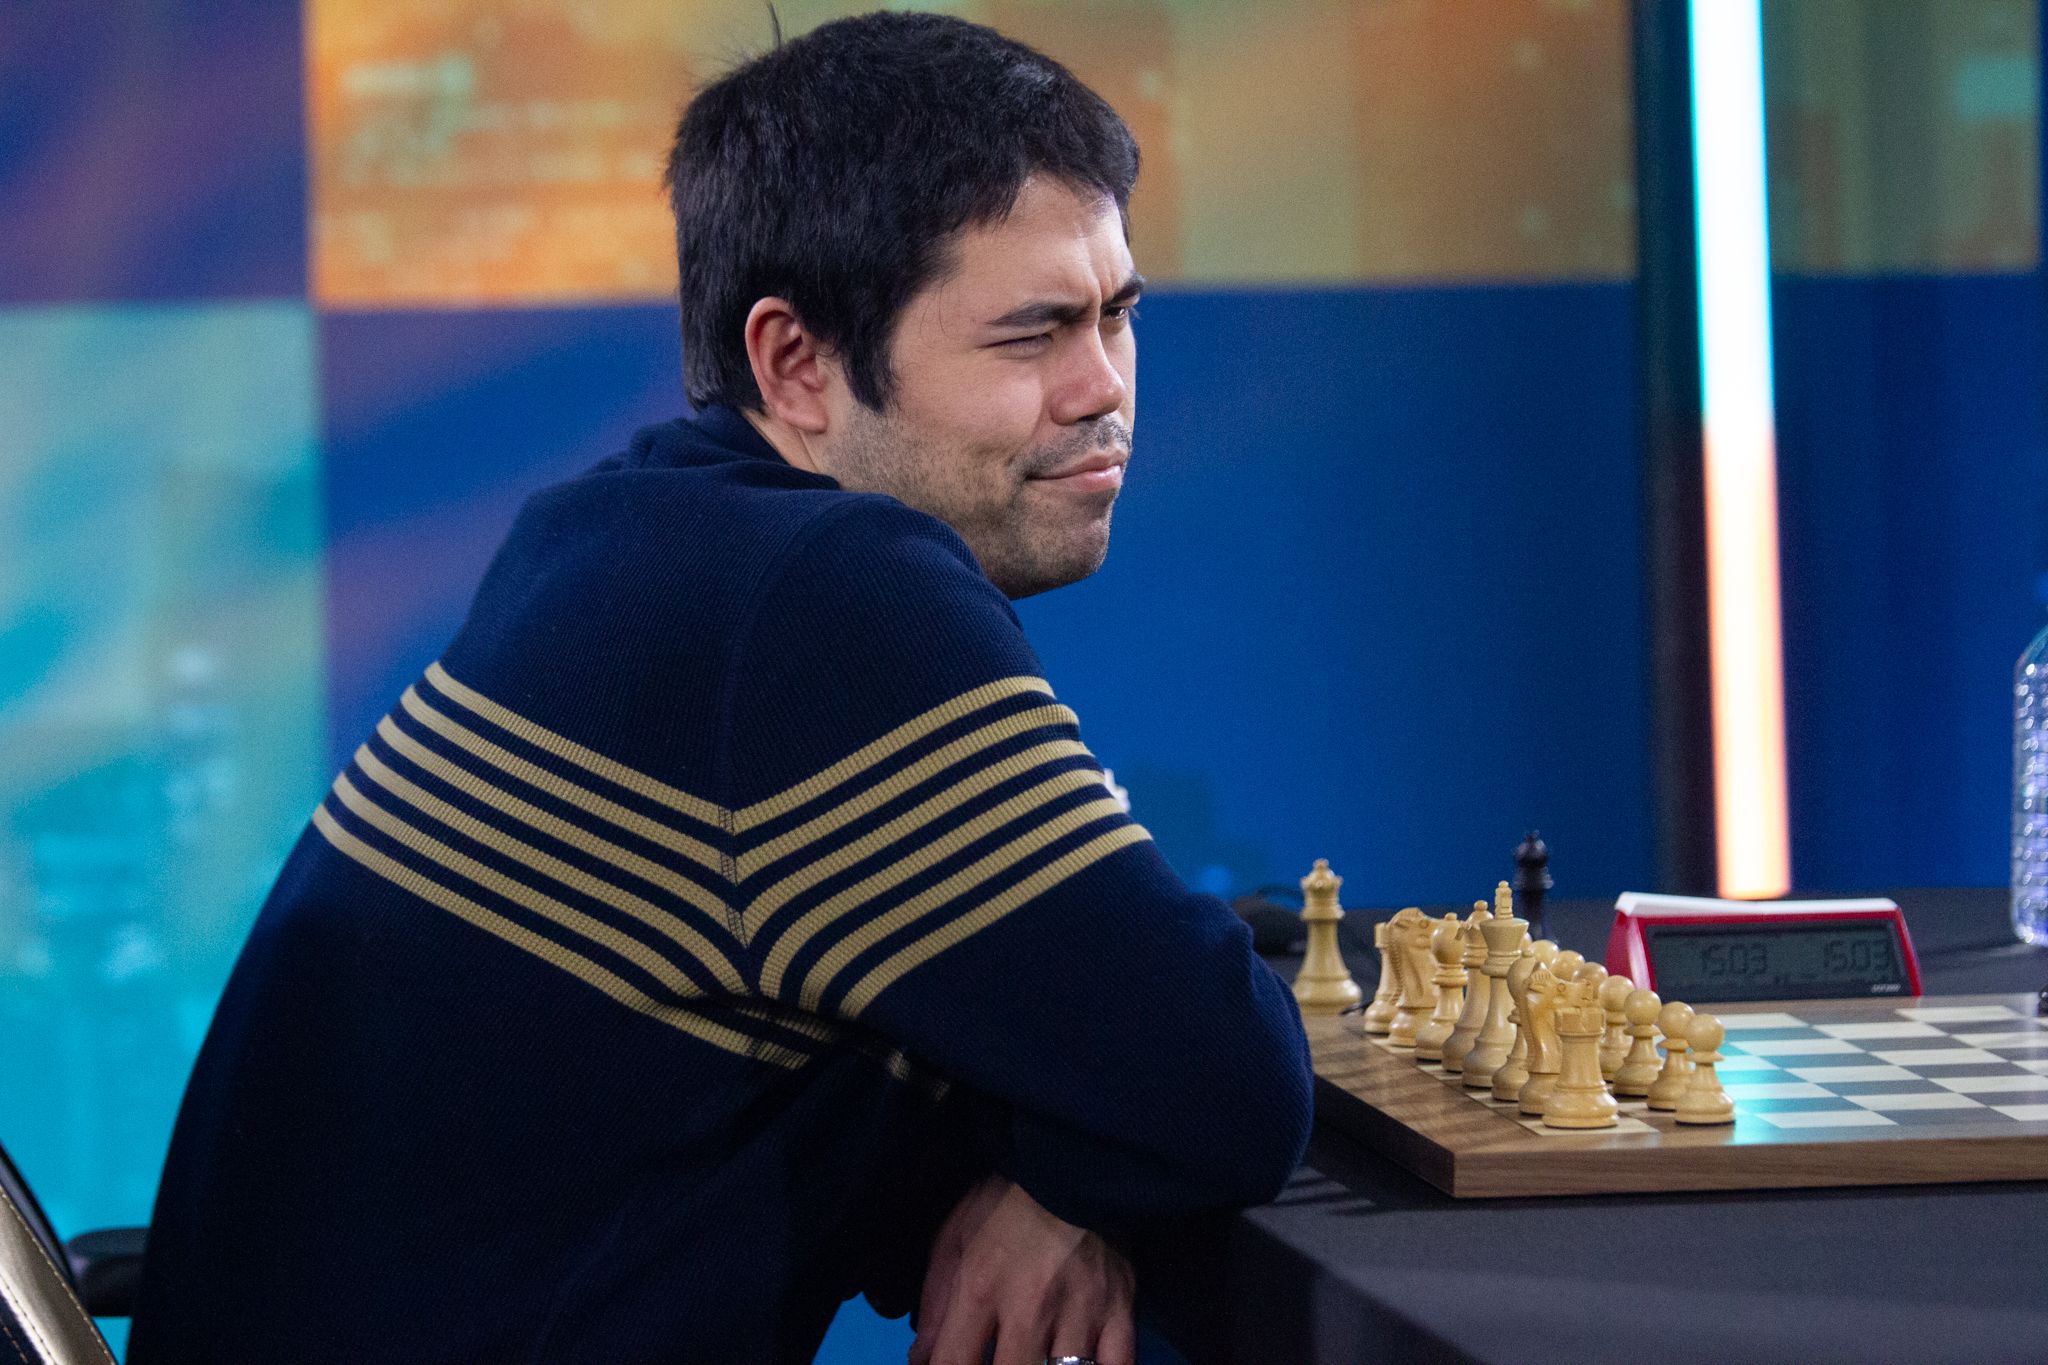 chess24 - Just when Wesley So again looked in danger of